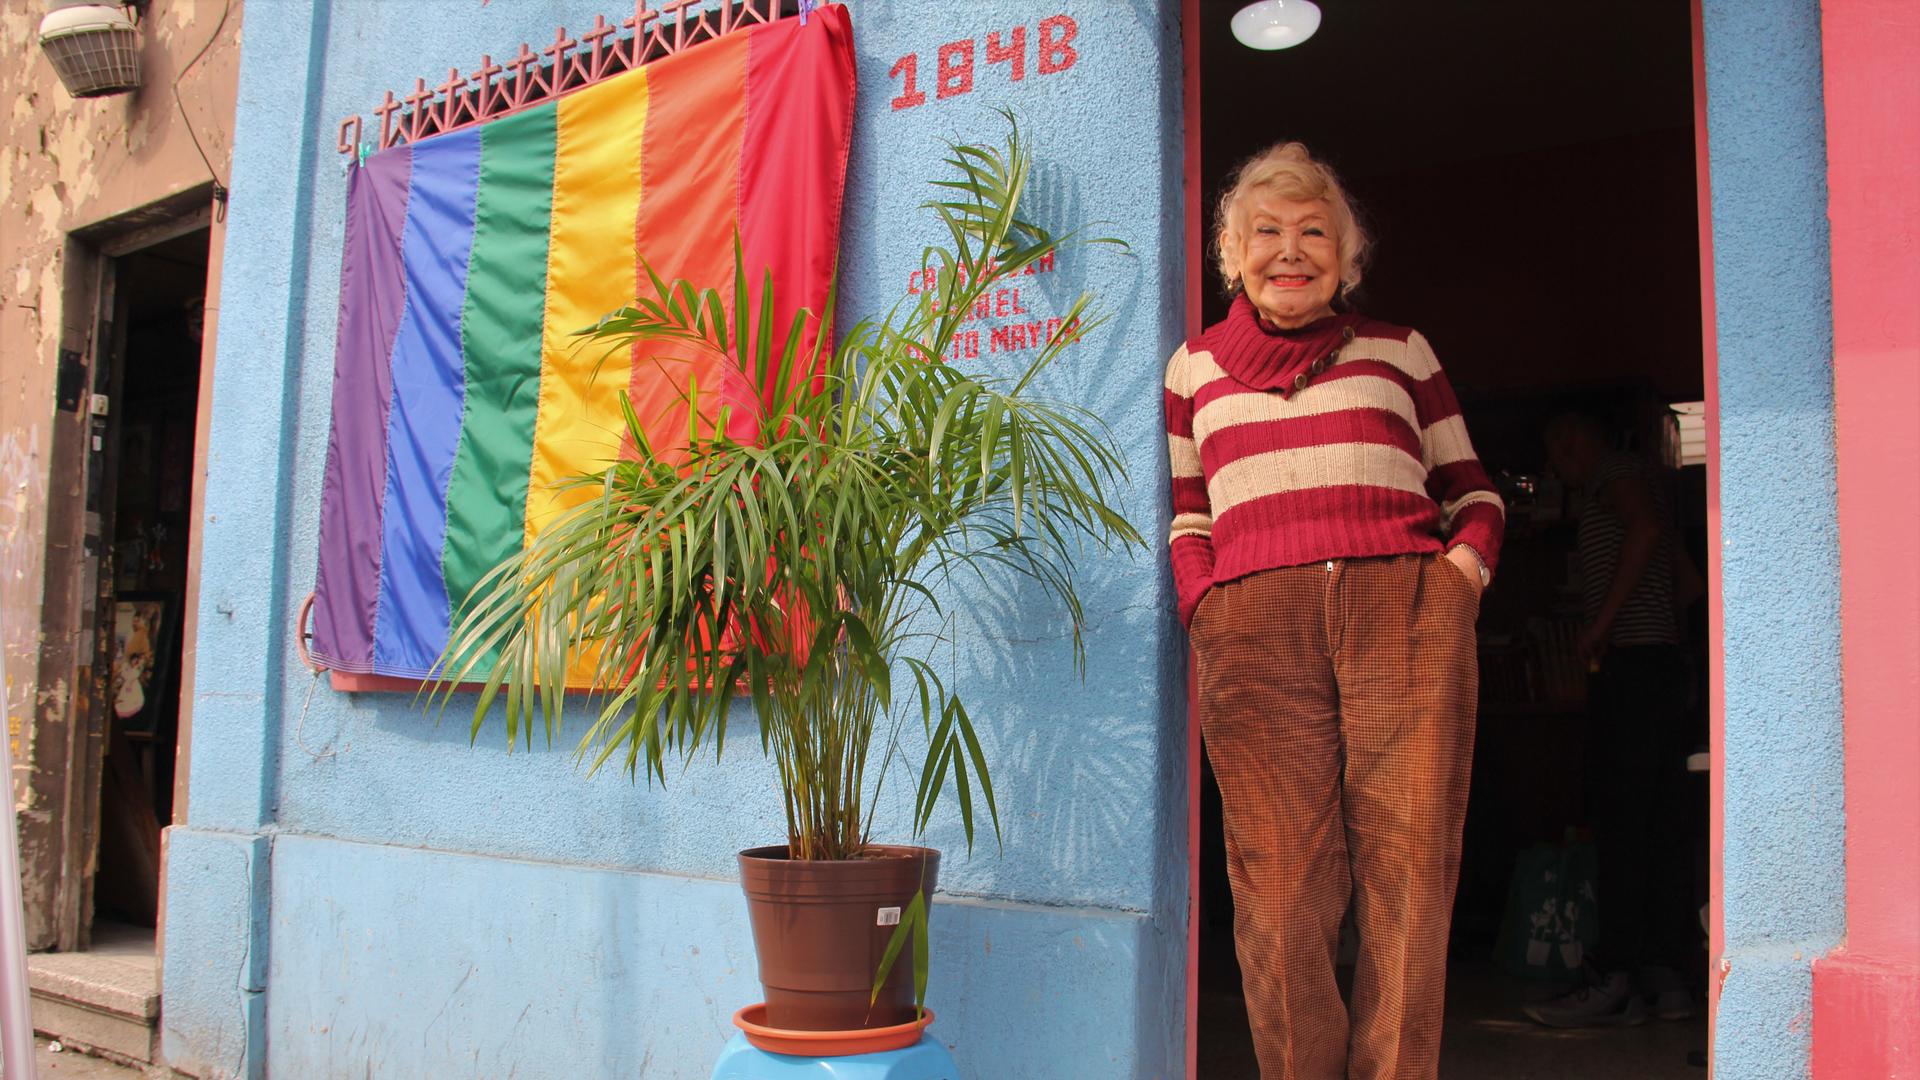 Samantha Flores, a trans woman, stands at the entrance to the Vida Alegre, a day center for older LGBTQ people in Mexico City that she cofounded. 